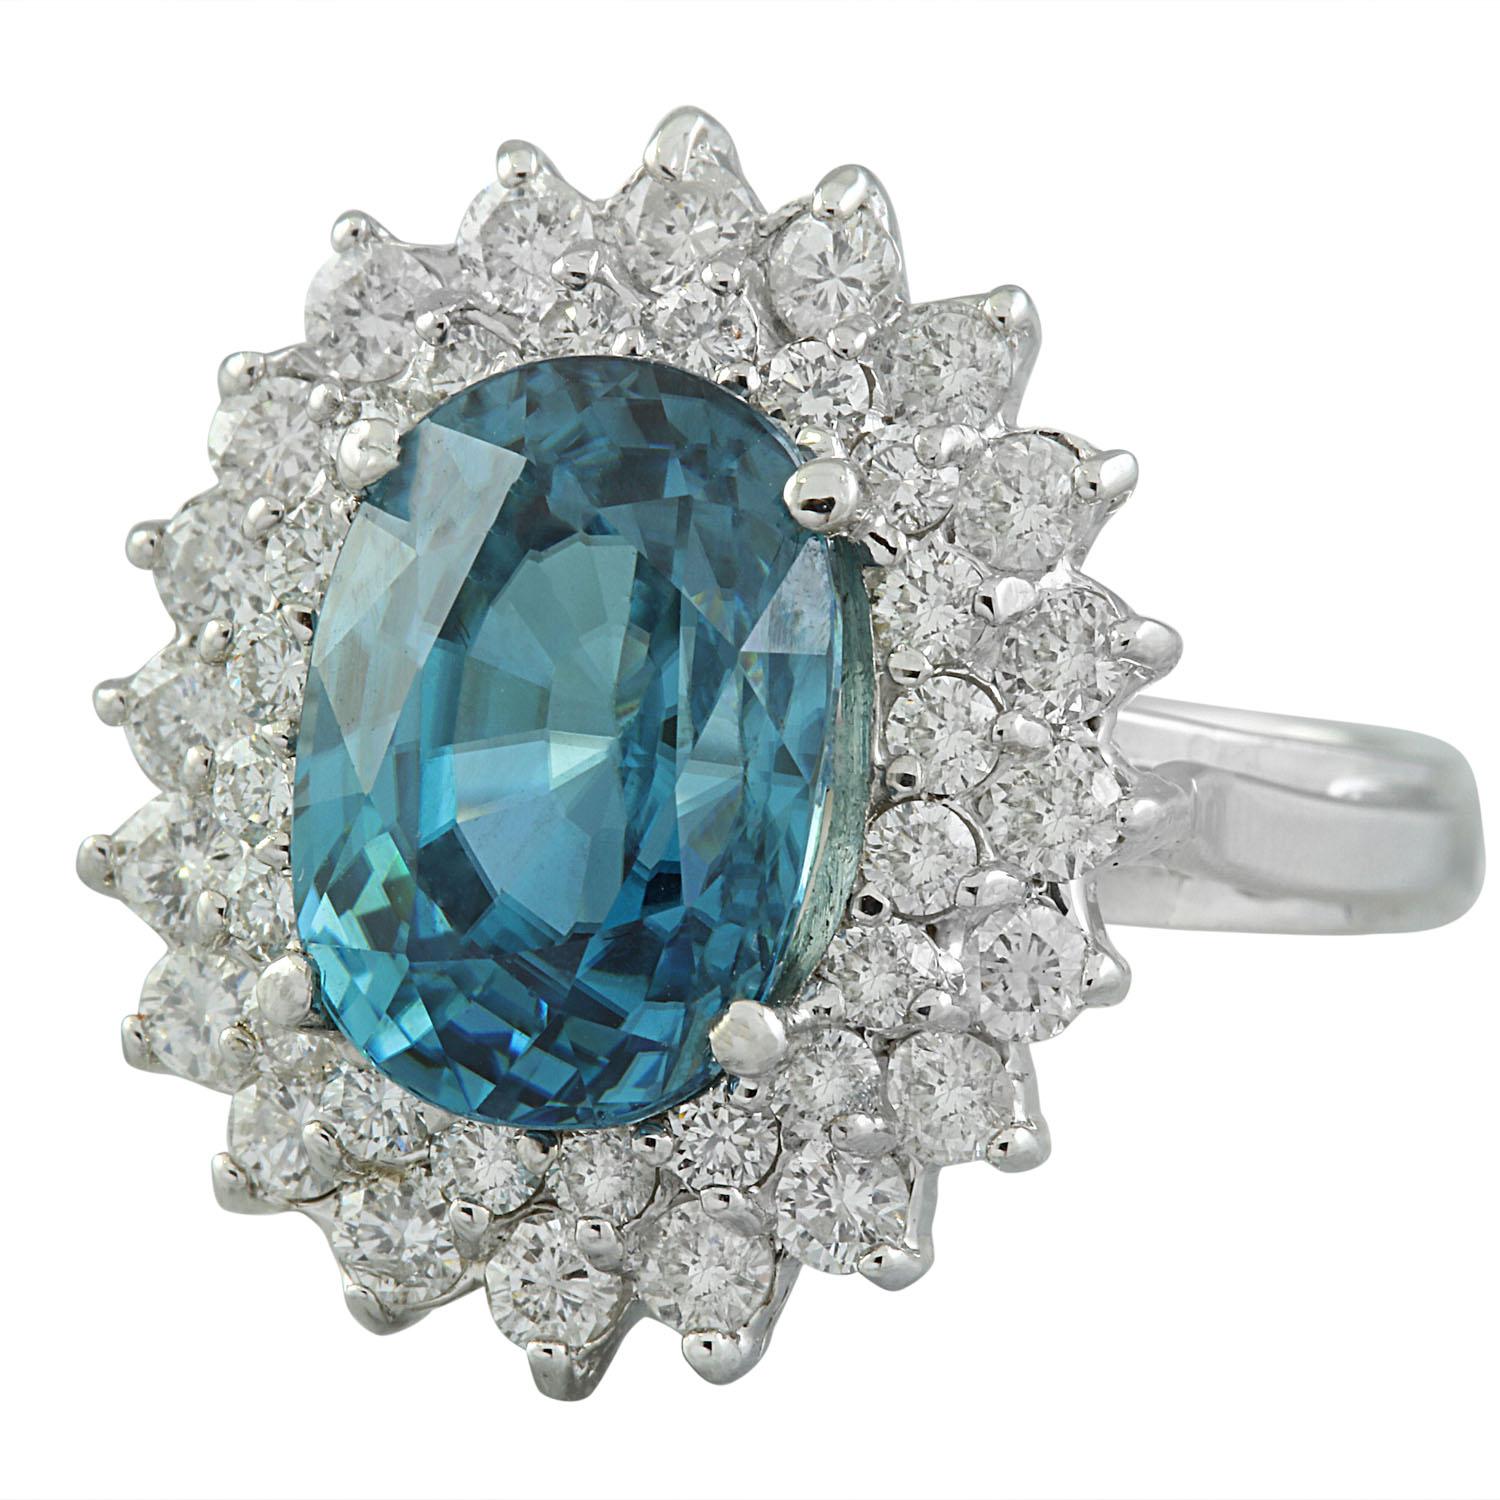 8.52 Carat Natural Zircon 14 Karat Solid White Gold Diamond Ring In New Condition For Sale In Los Angeles, CA